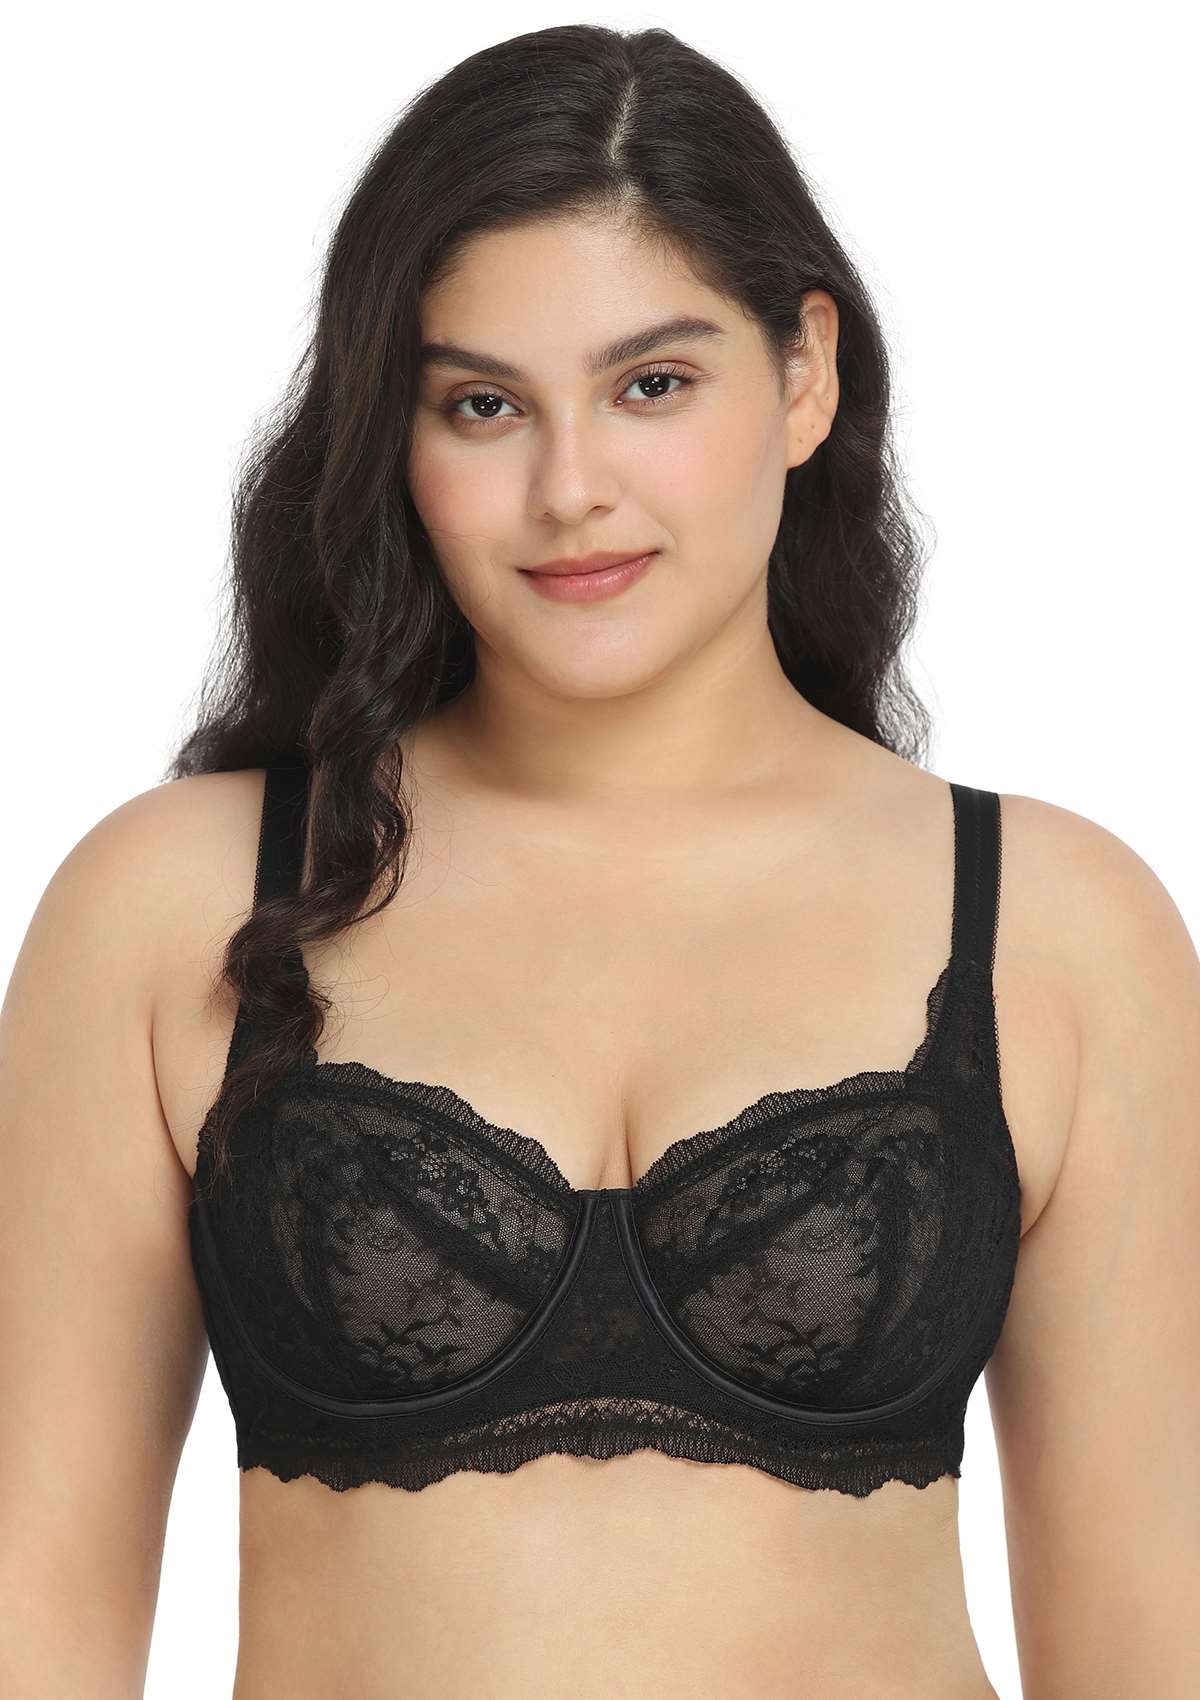 HSIA I Do Floral Lace Bridal Balconette Beautiful Bra For Special Day - Black / 38 / C